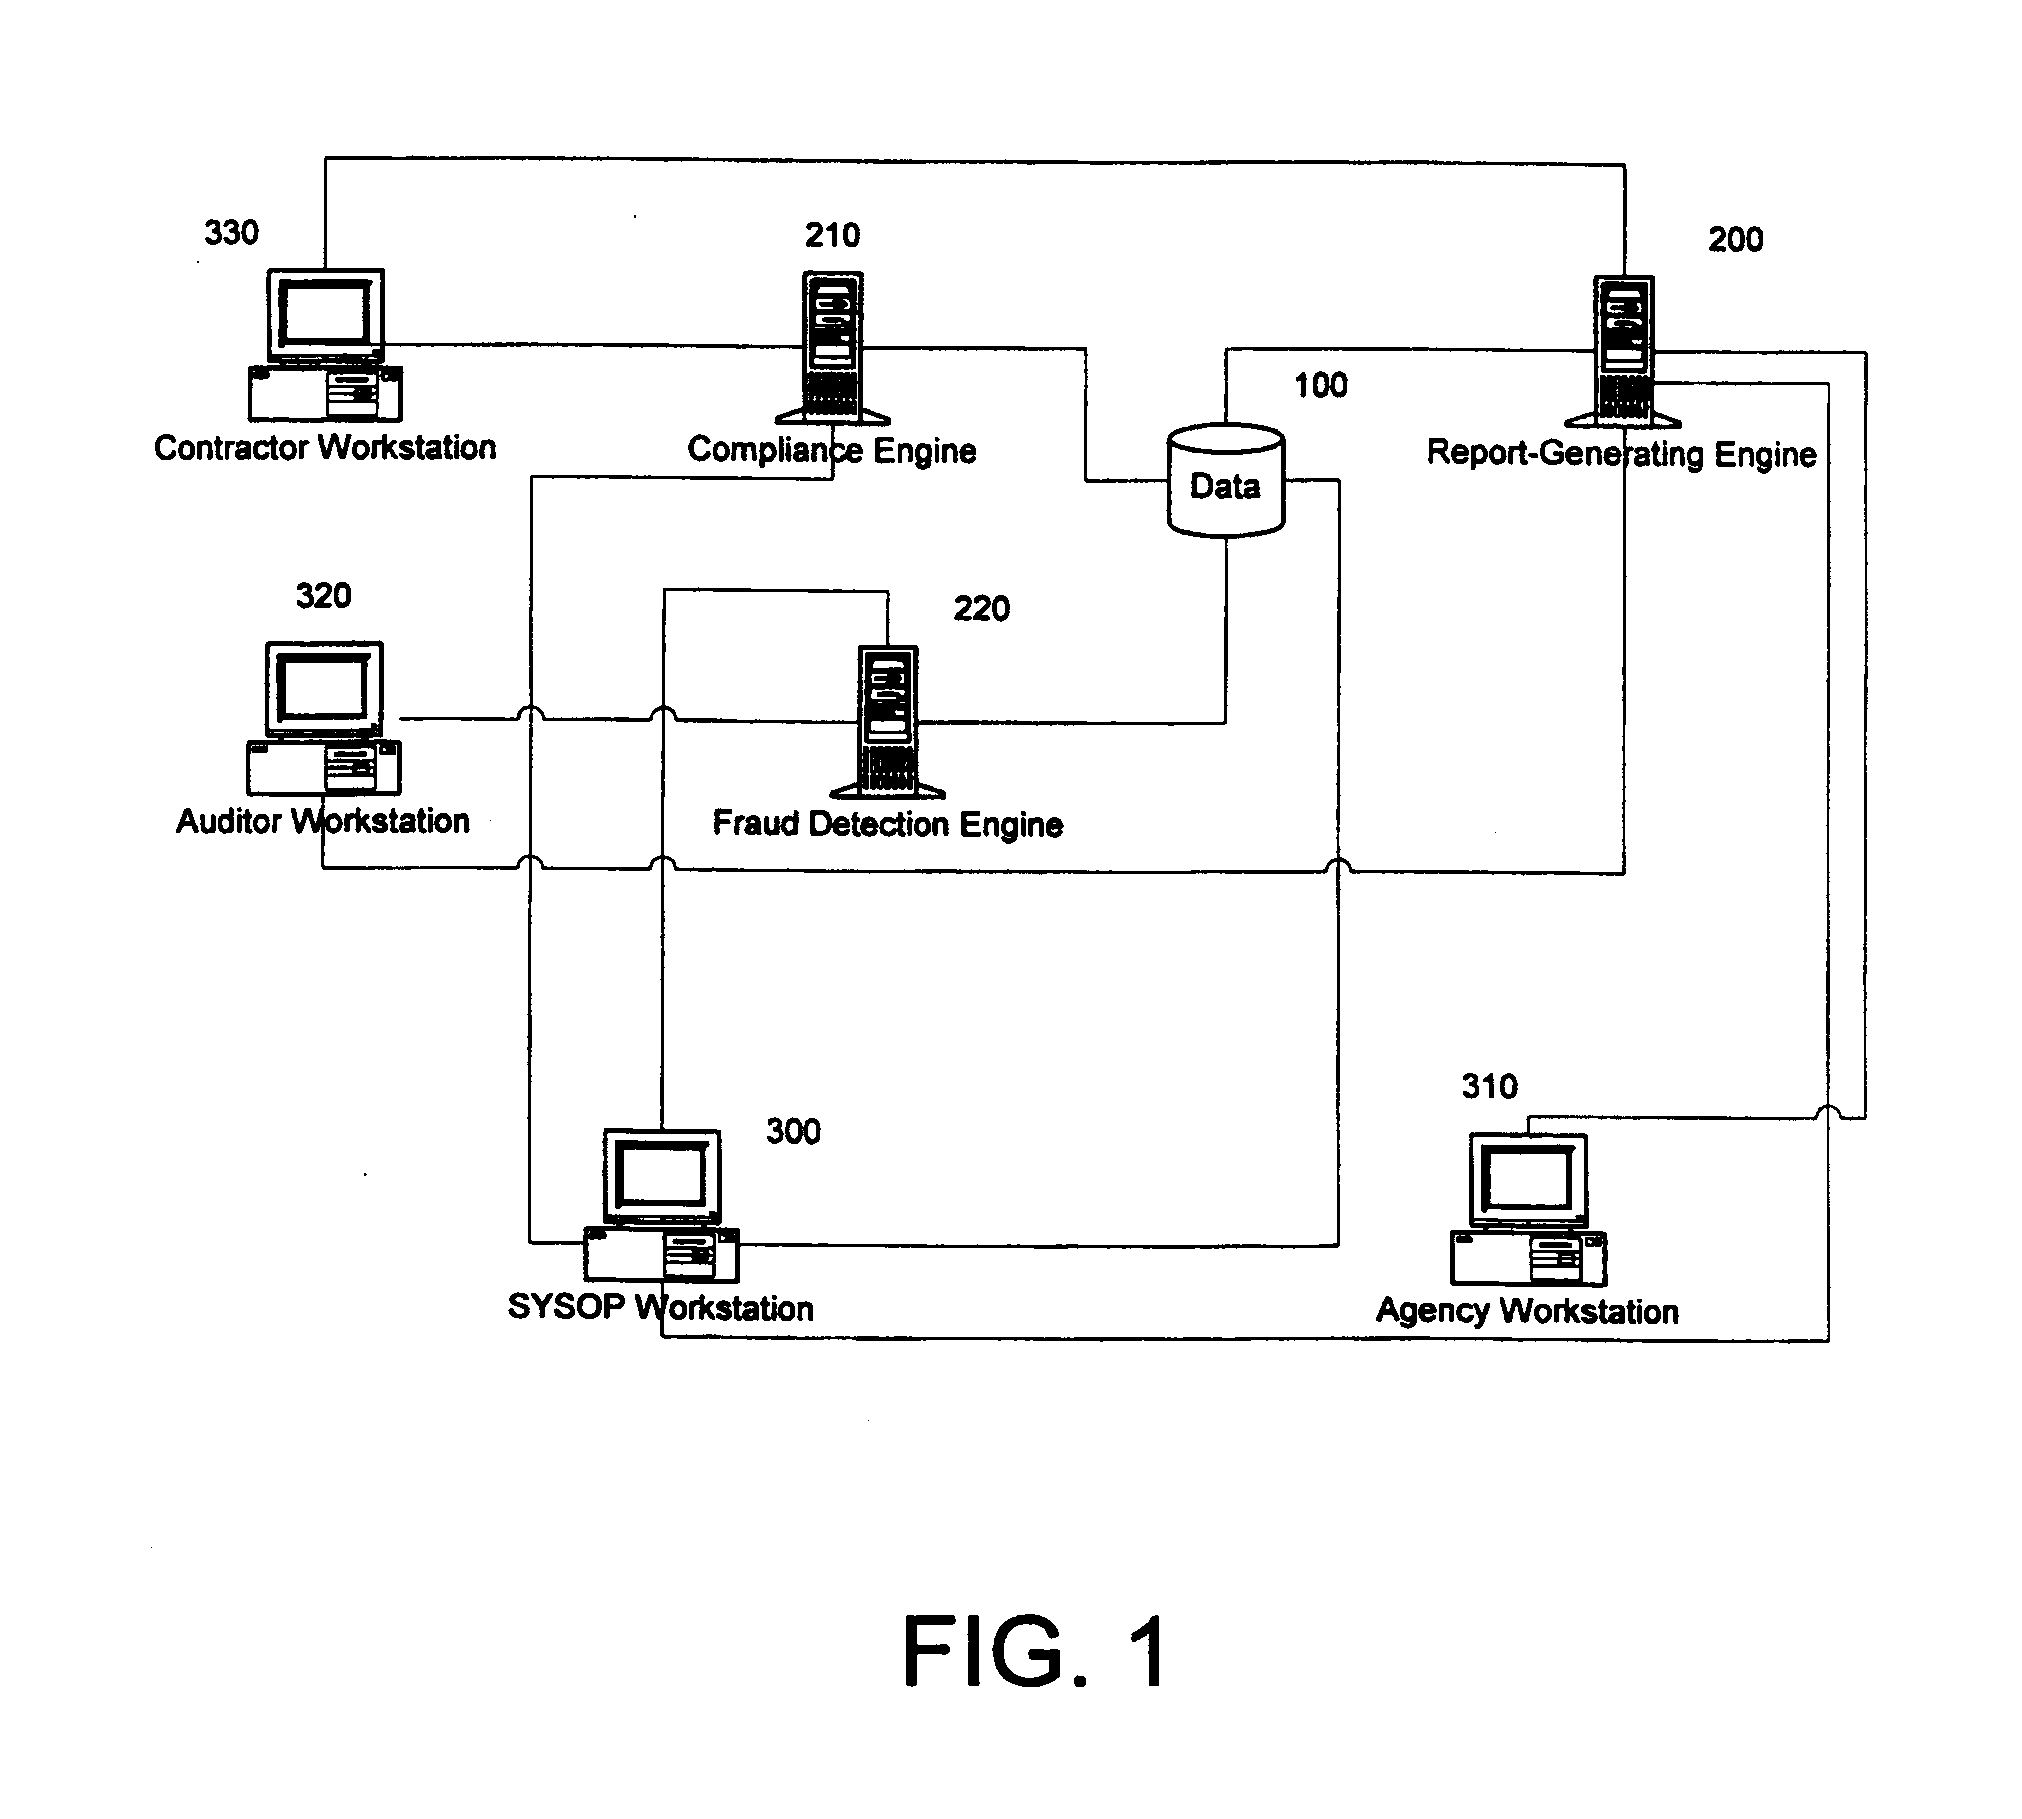 System and Method for Coordinating the Collection, Analysis and Storage of Payroll Information Provided to Government Agencies by Government Contractors